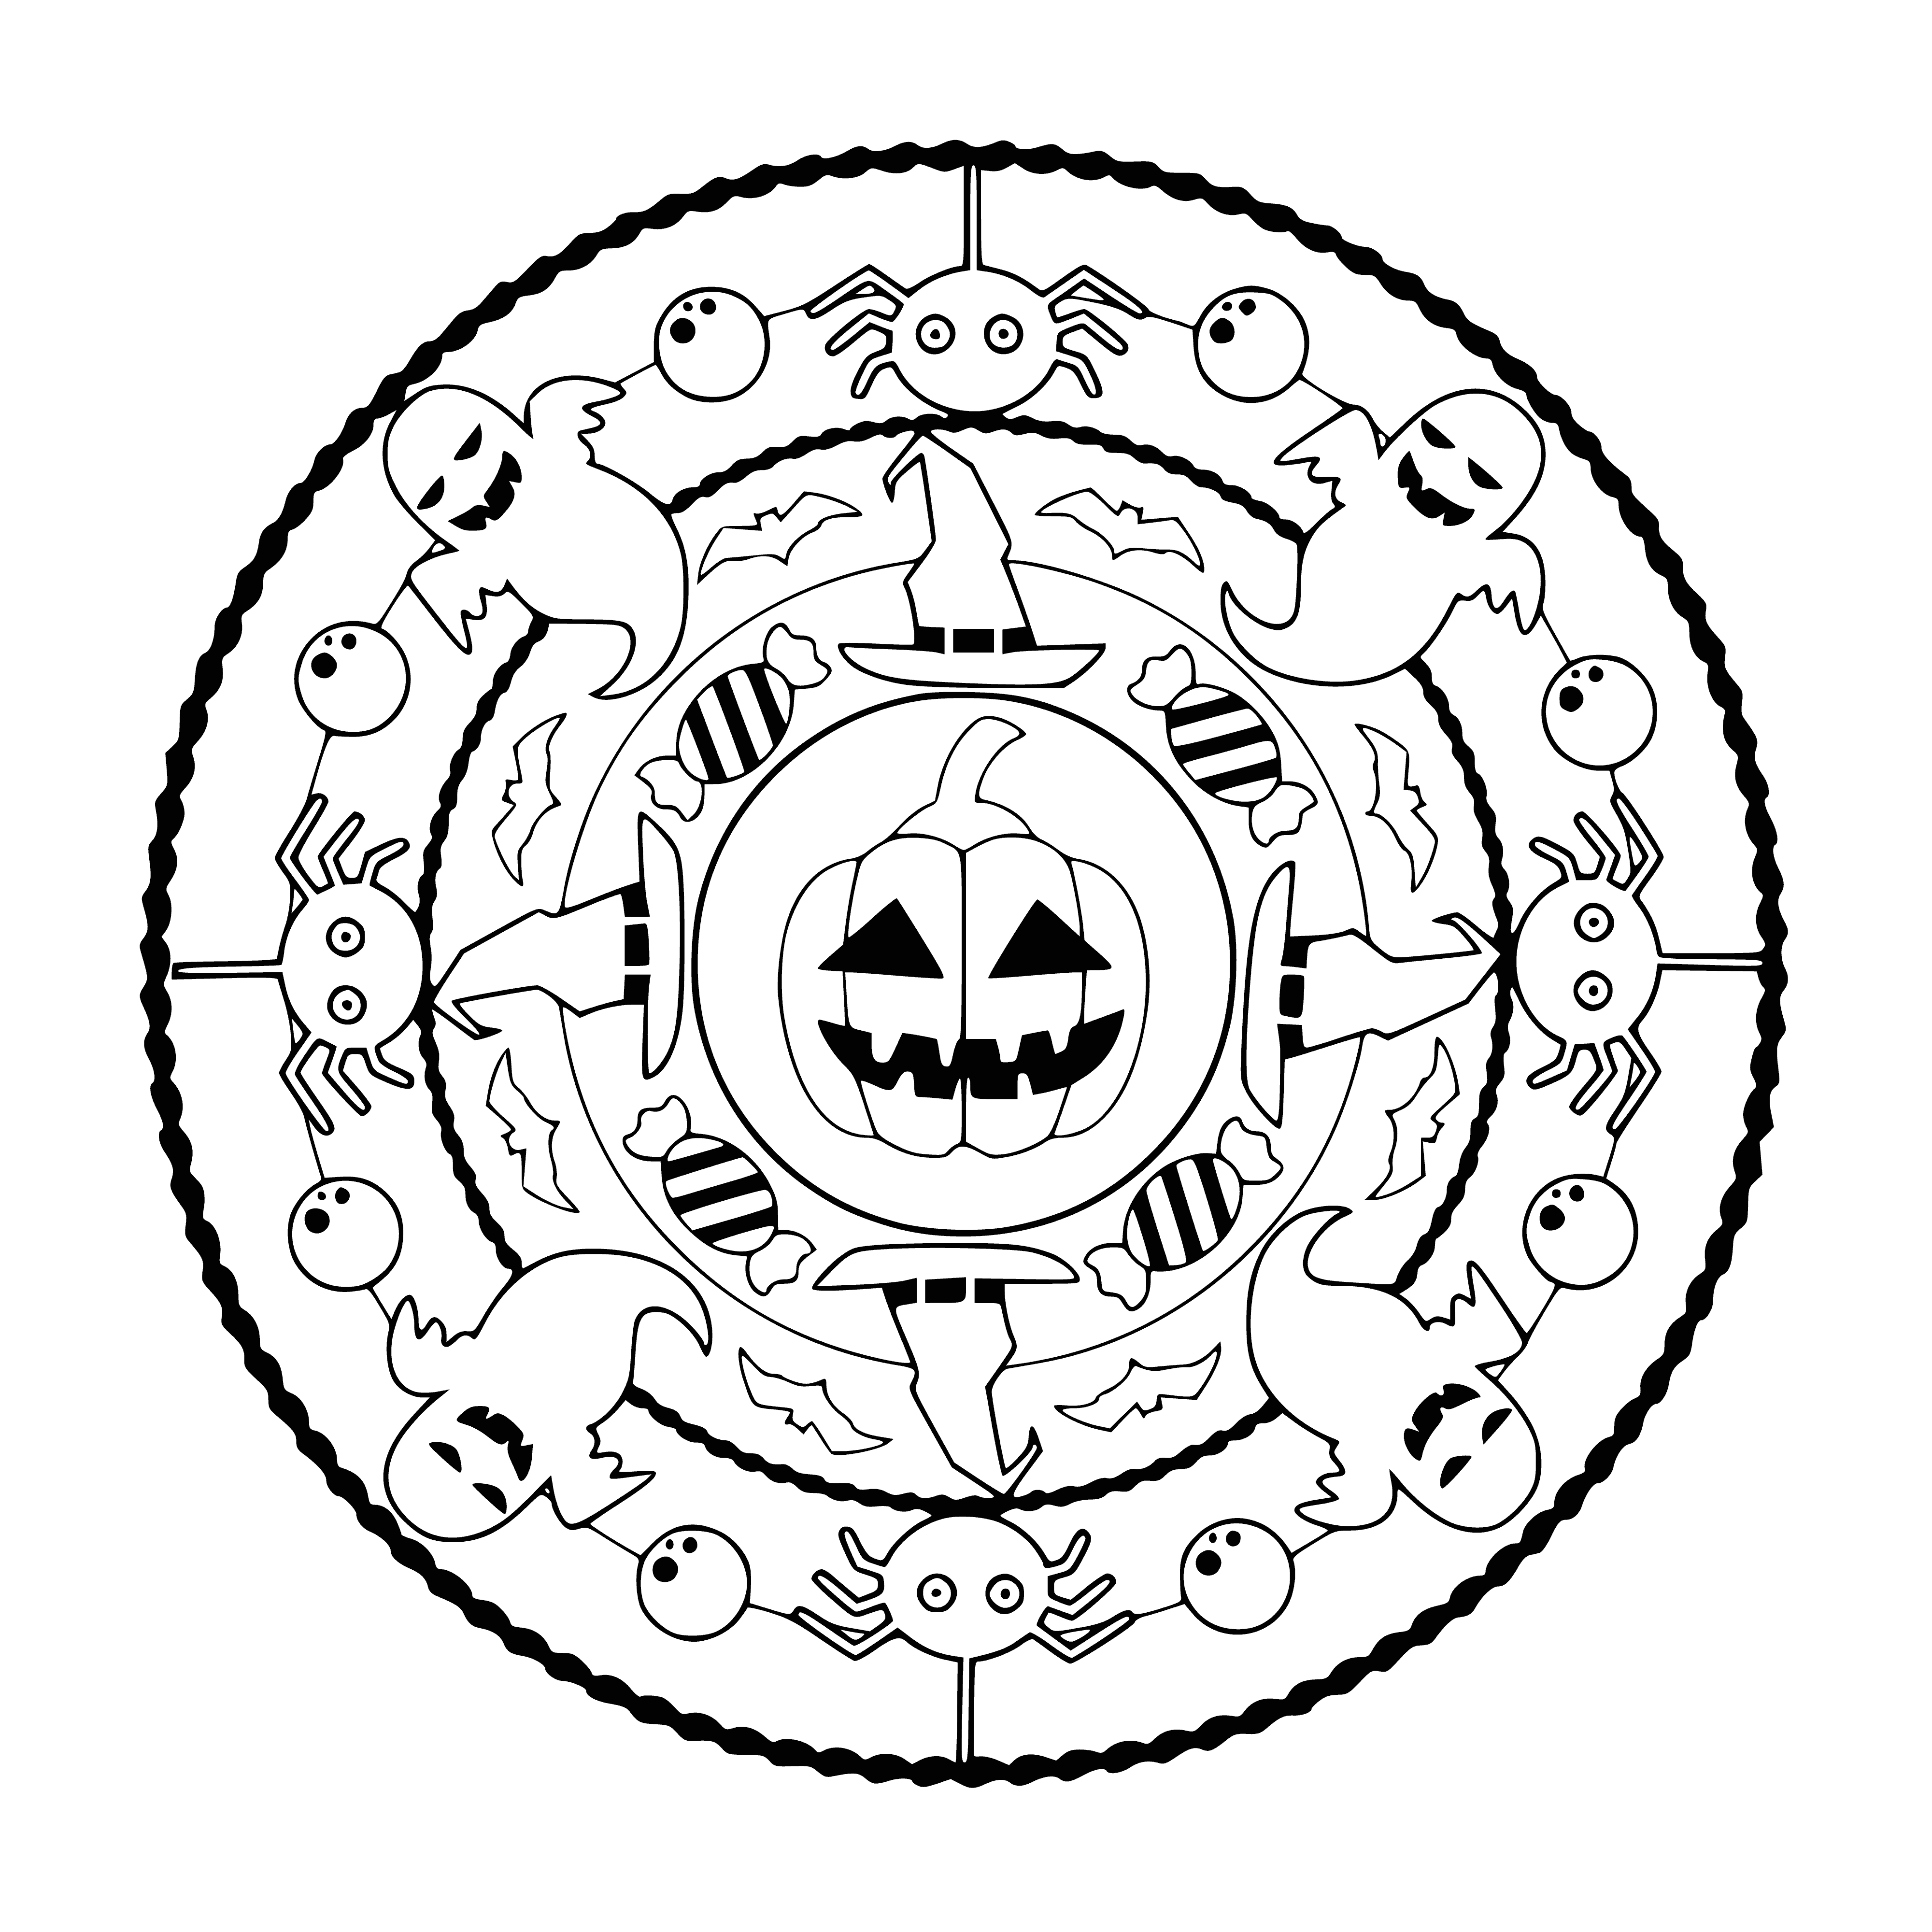 coloring page: Color Halloween symbols like ghosts, bats, pumpkins in this mandala coloring page!